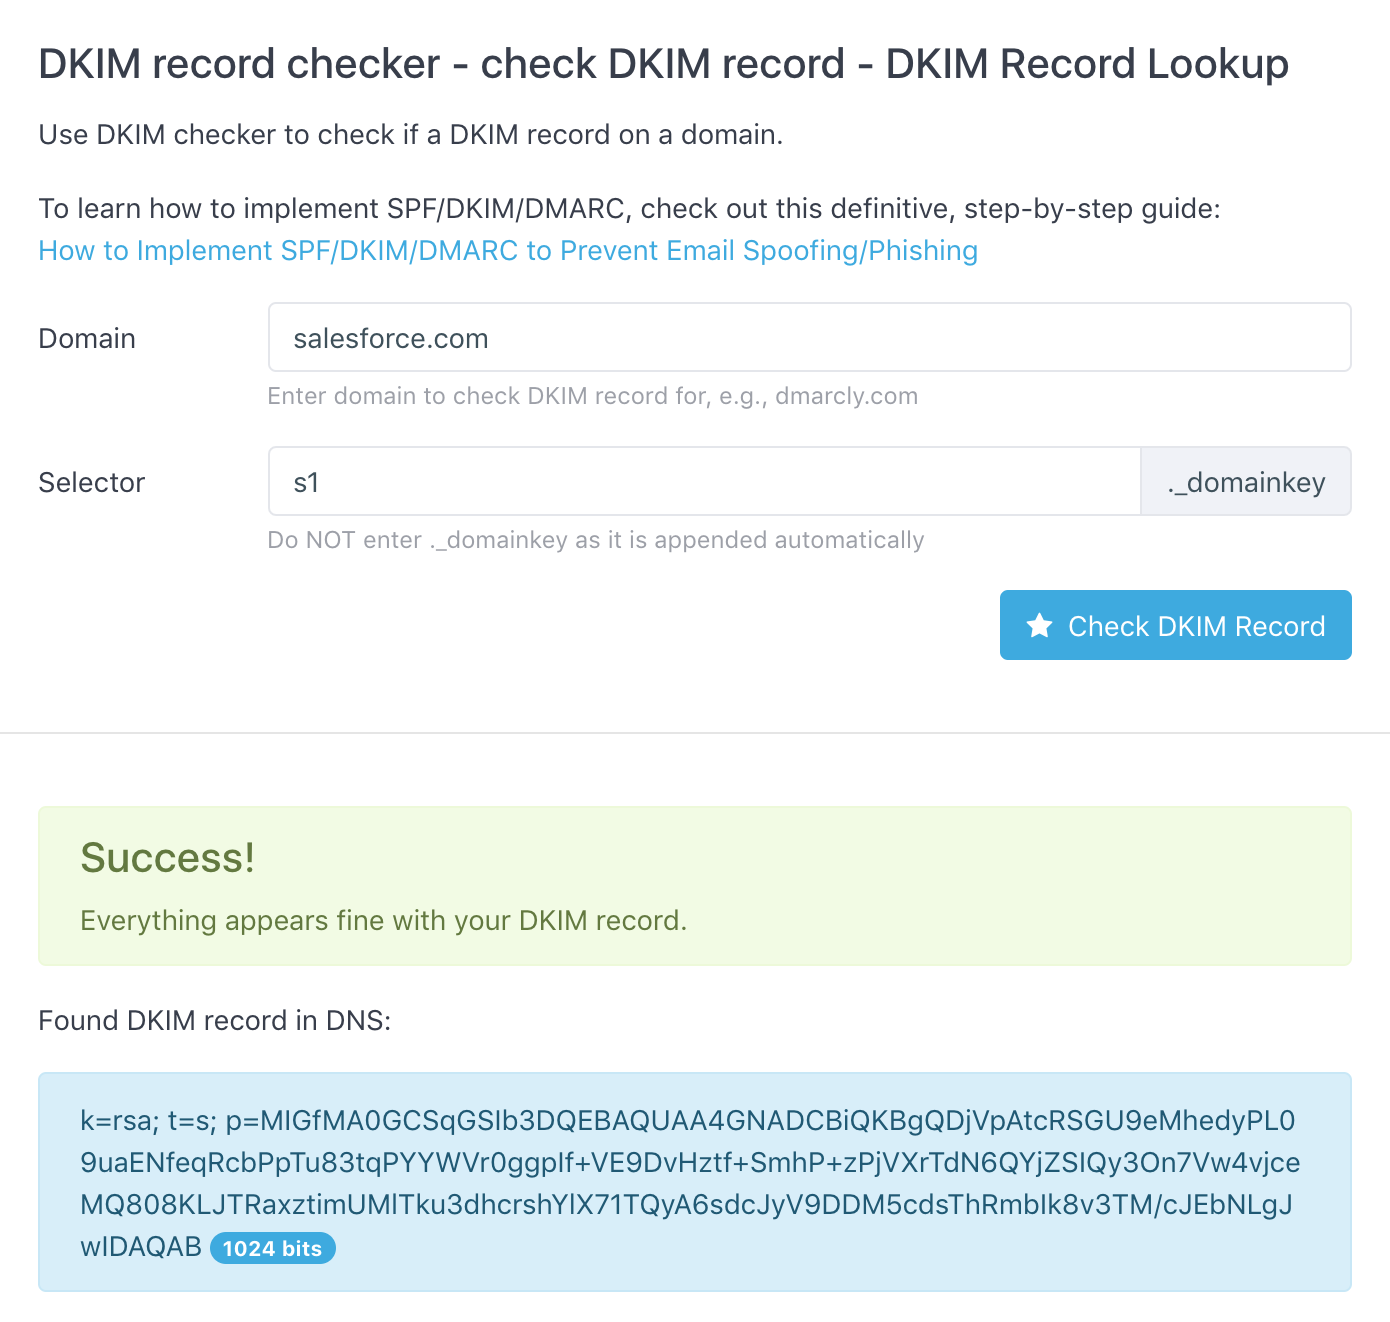 Find DKIM record by DKIM selector on domain